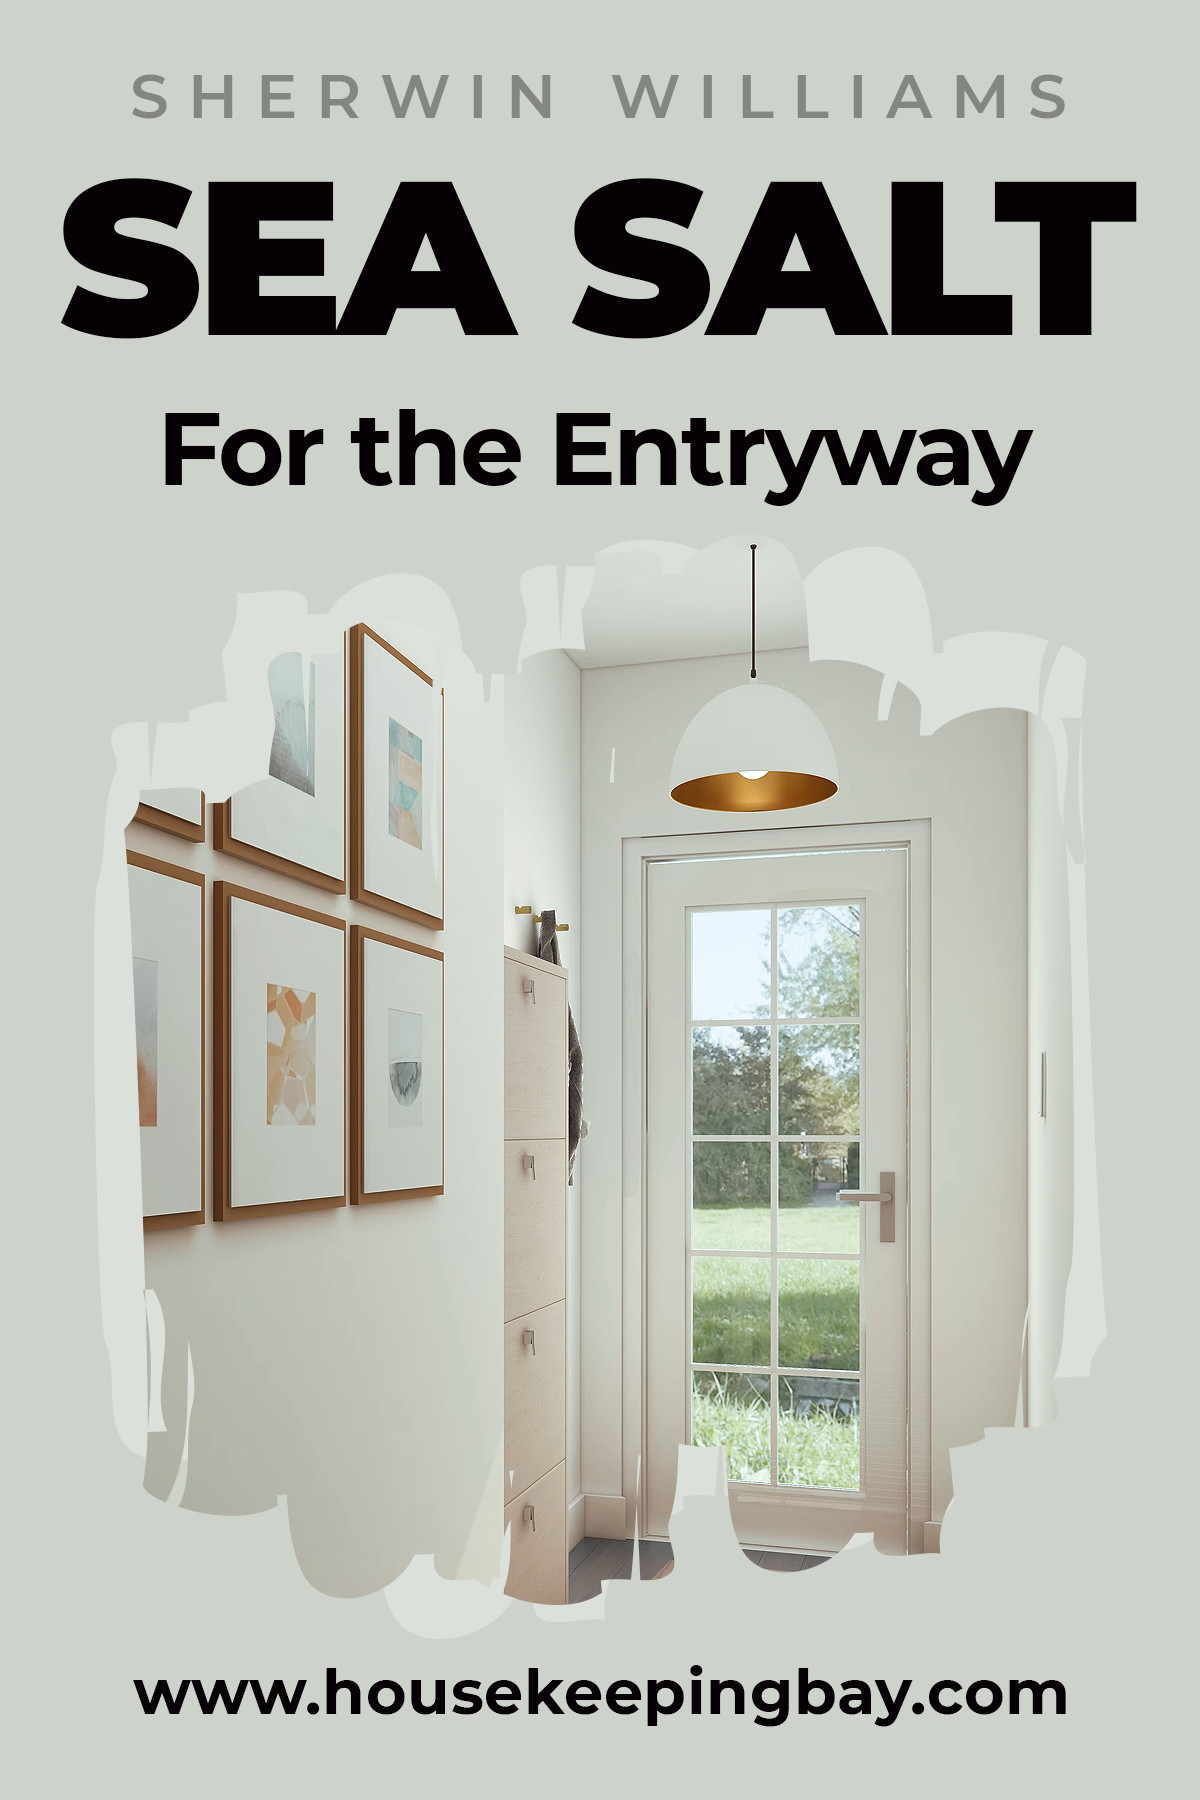 Sherwin Williams Sea Salt For the entryway